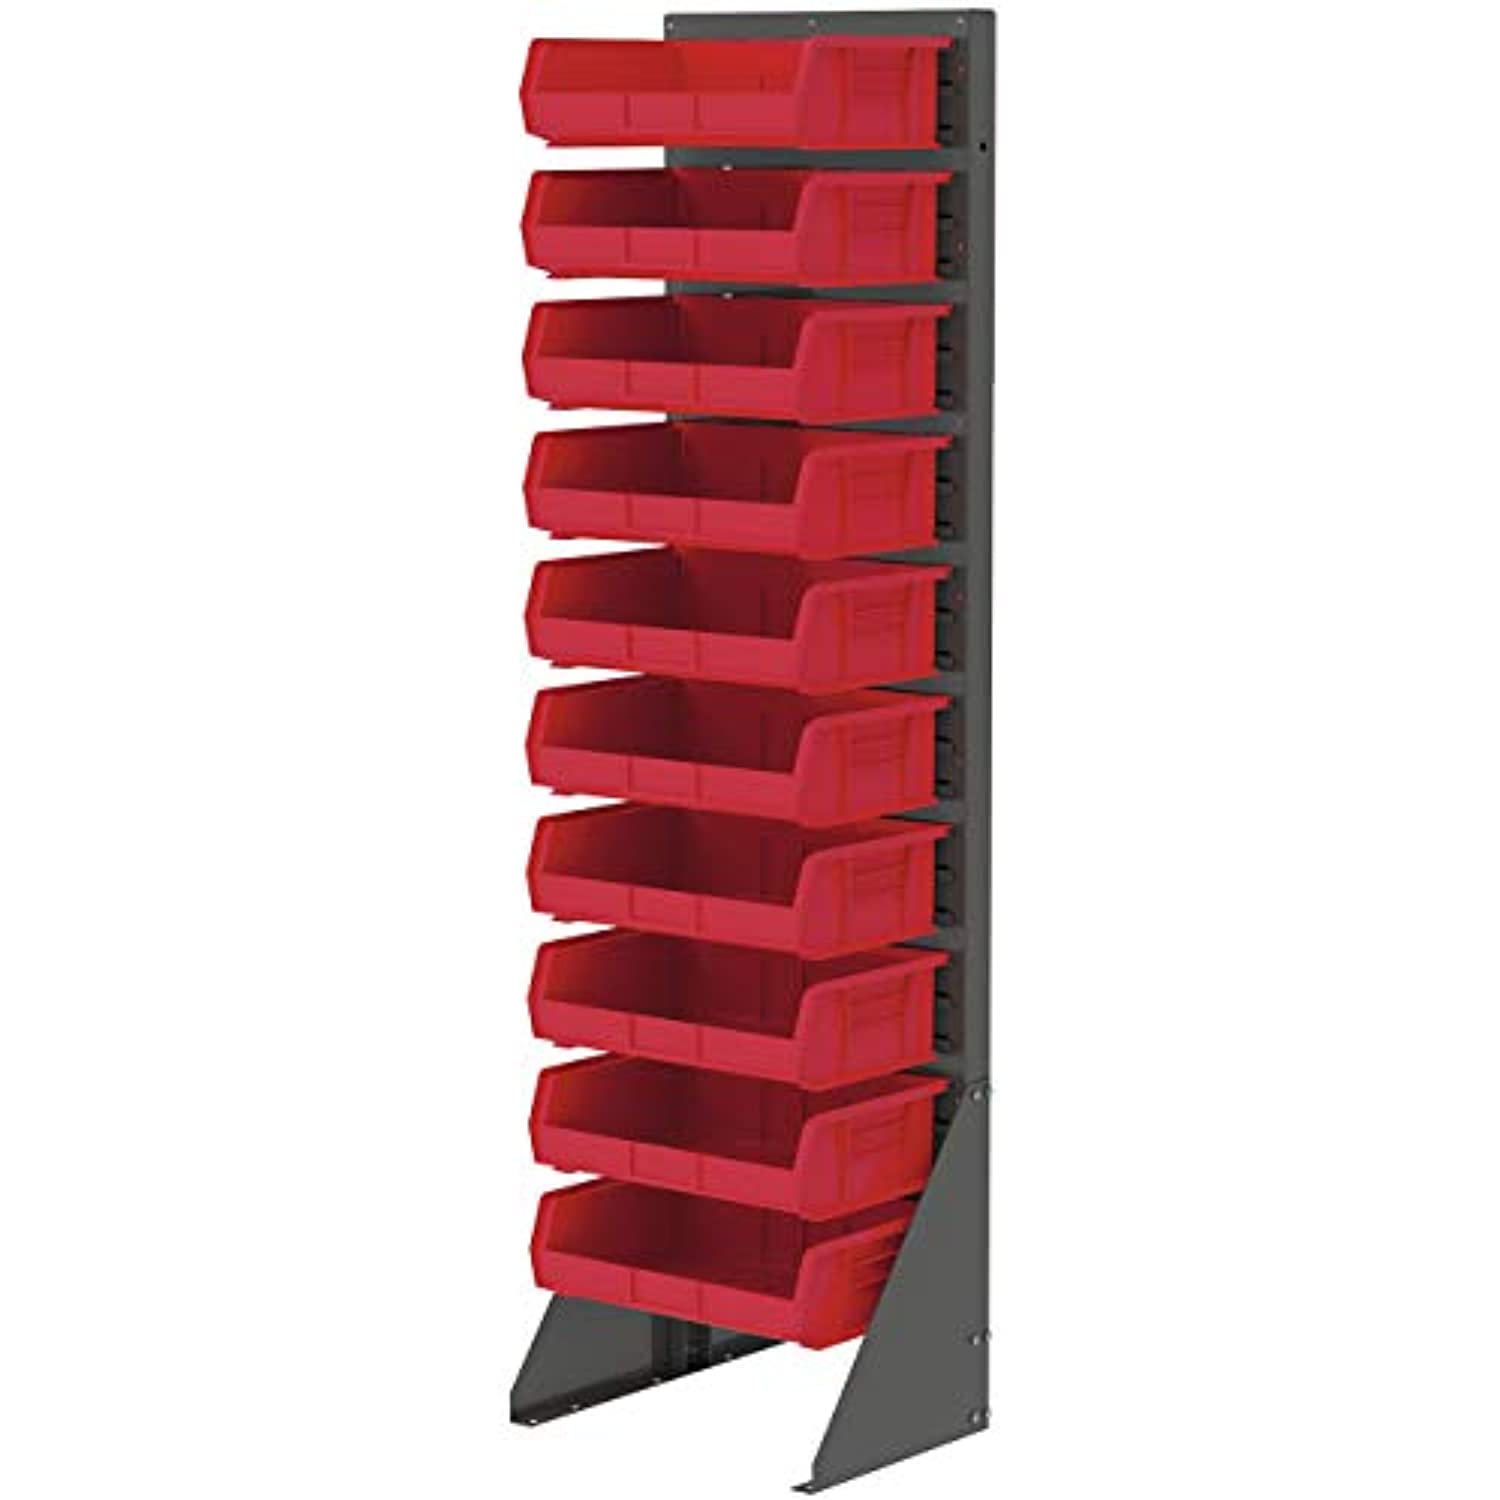 Akro-mils Hang and Stack Bin Red  Industrial Grade Polymer 30255RED - image 3 of 6